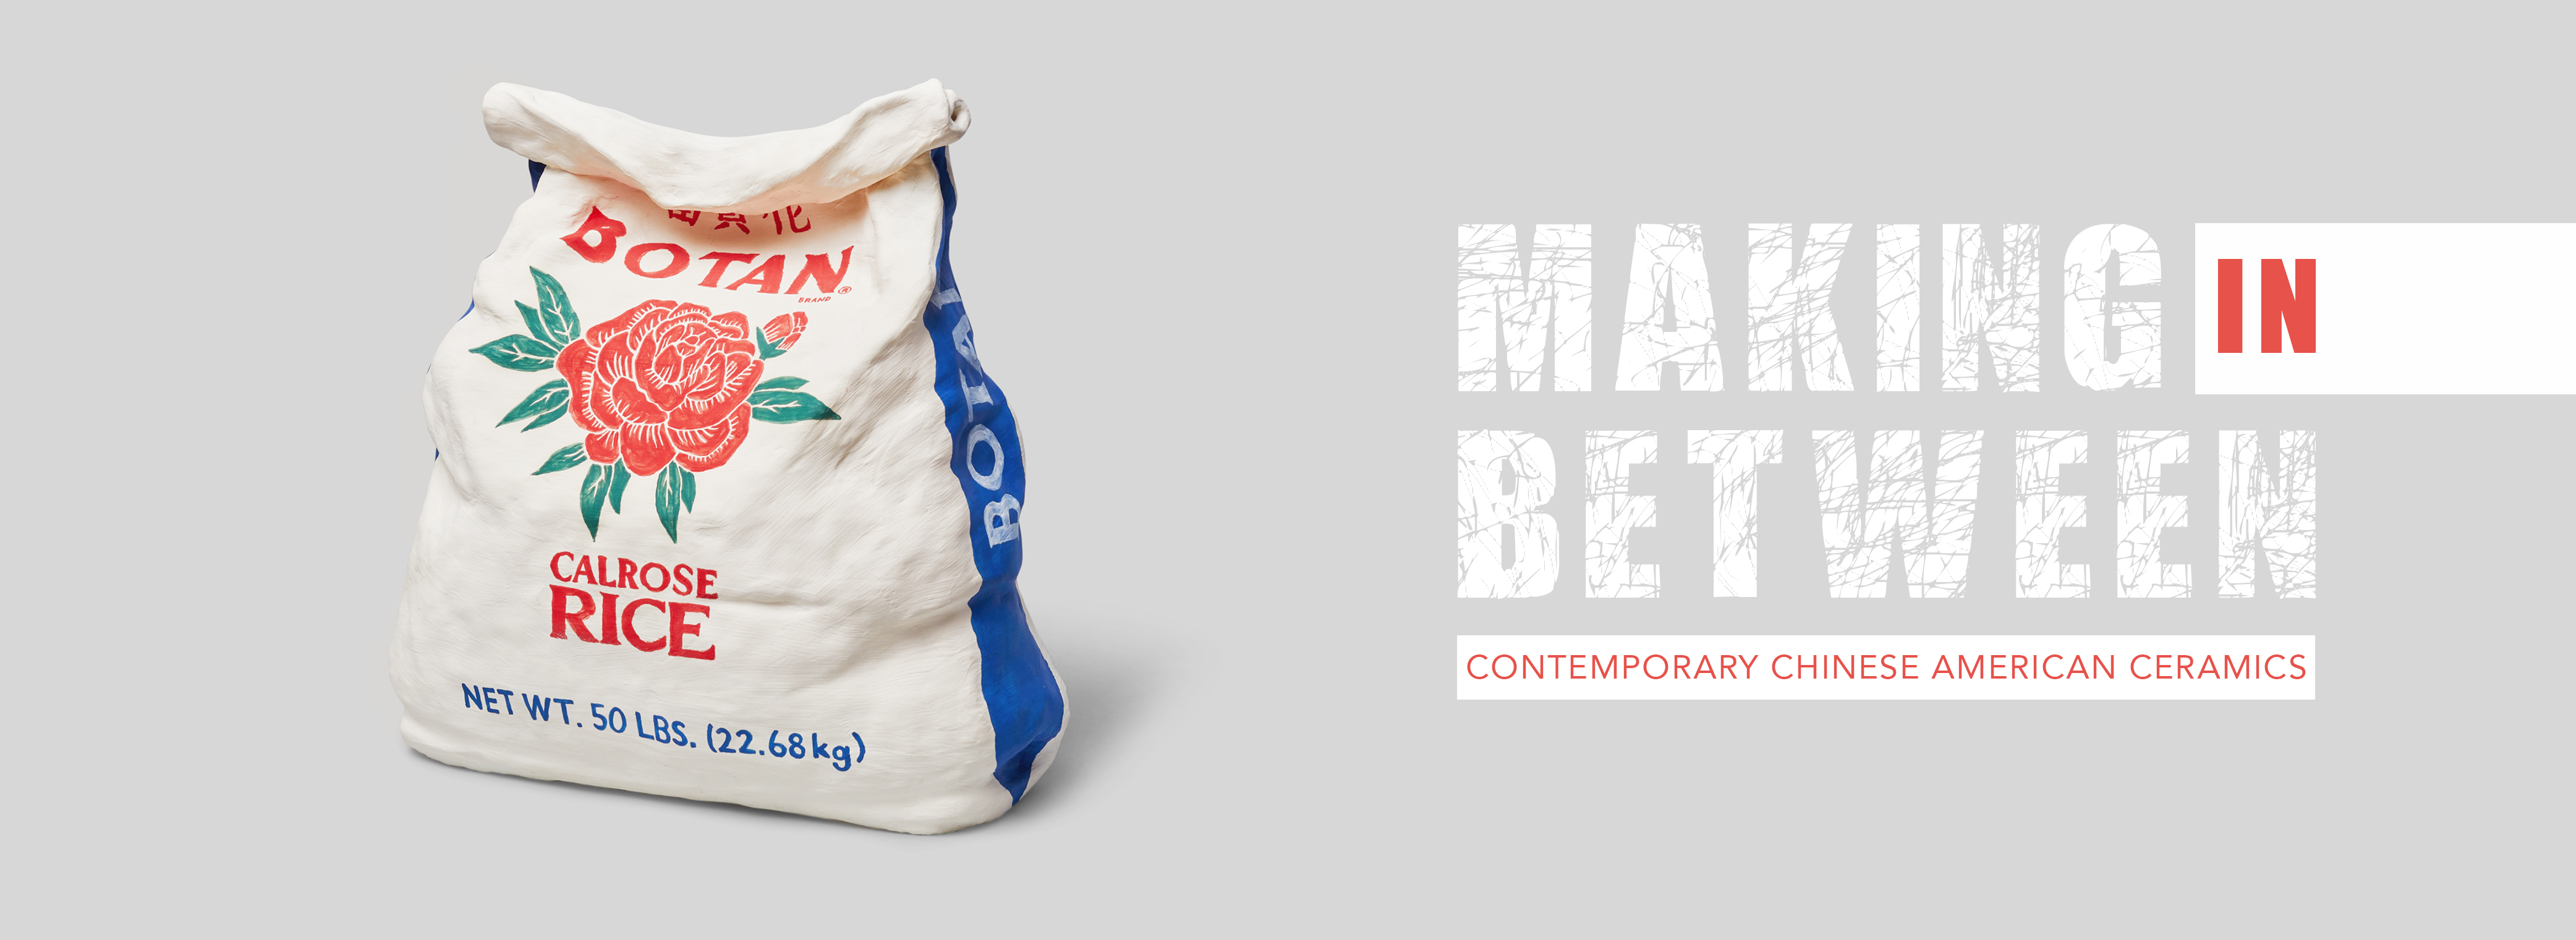 Making in Between: Contemporary Chinese American Ceramics